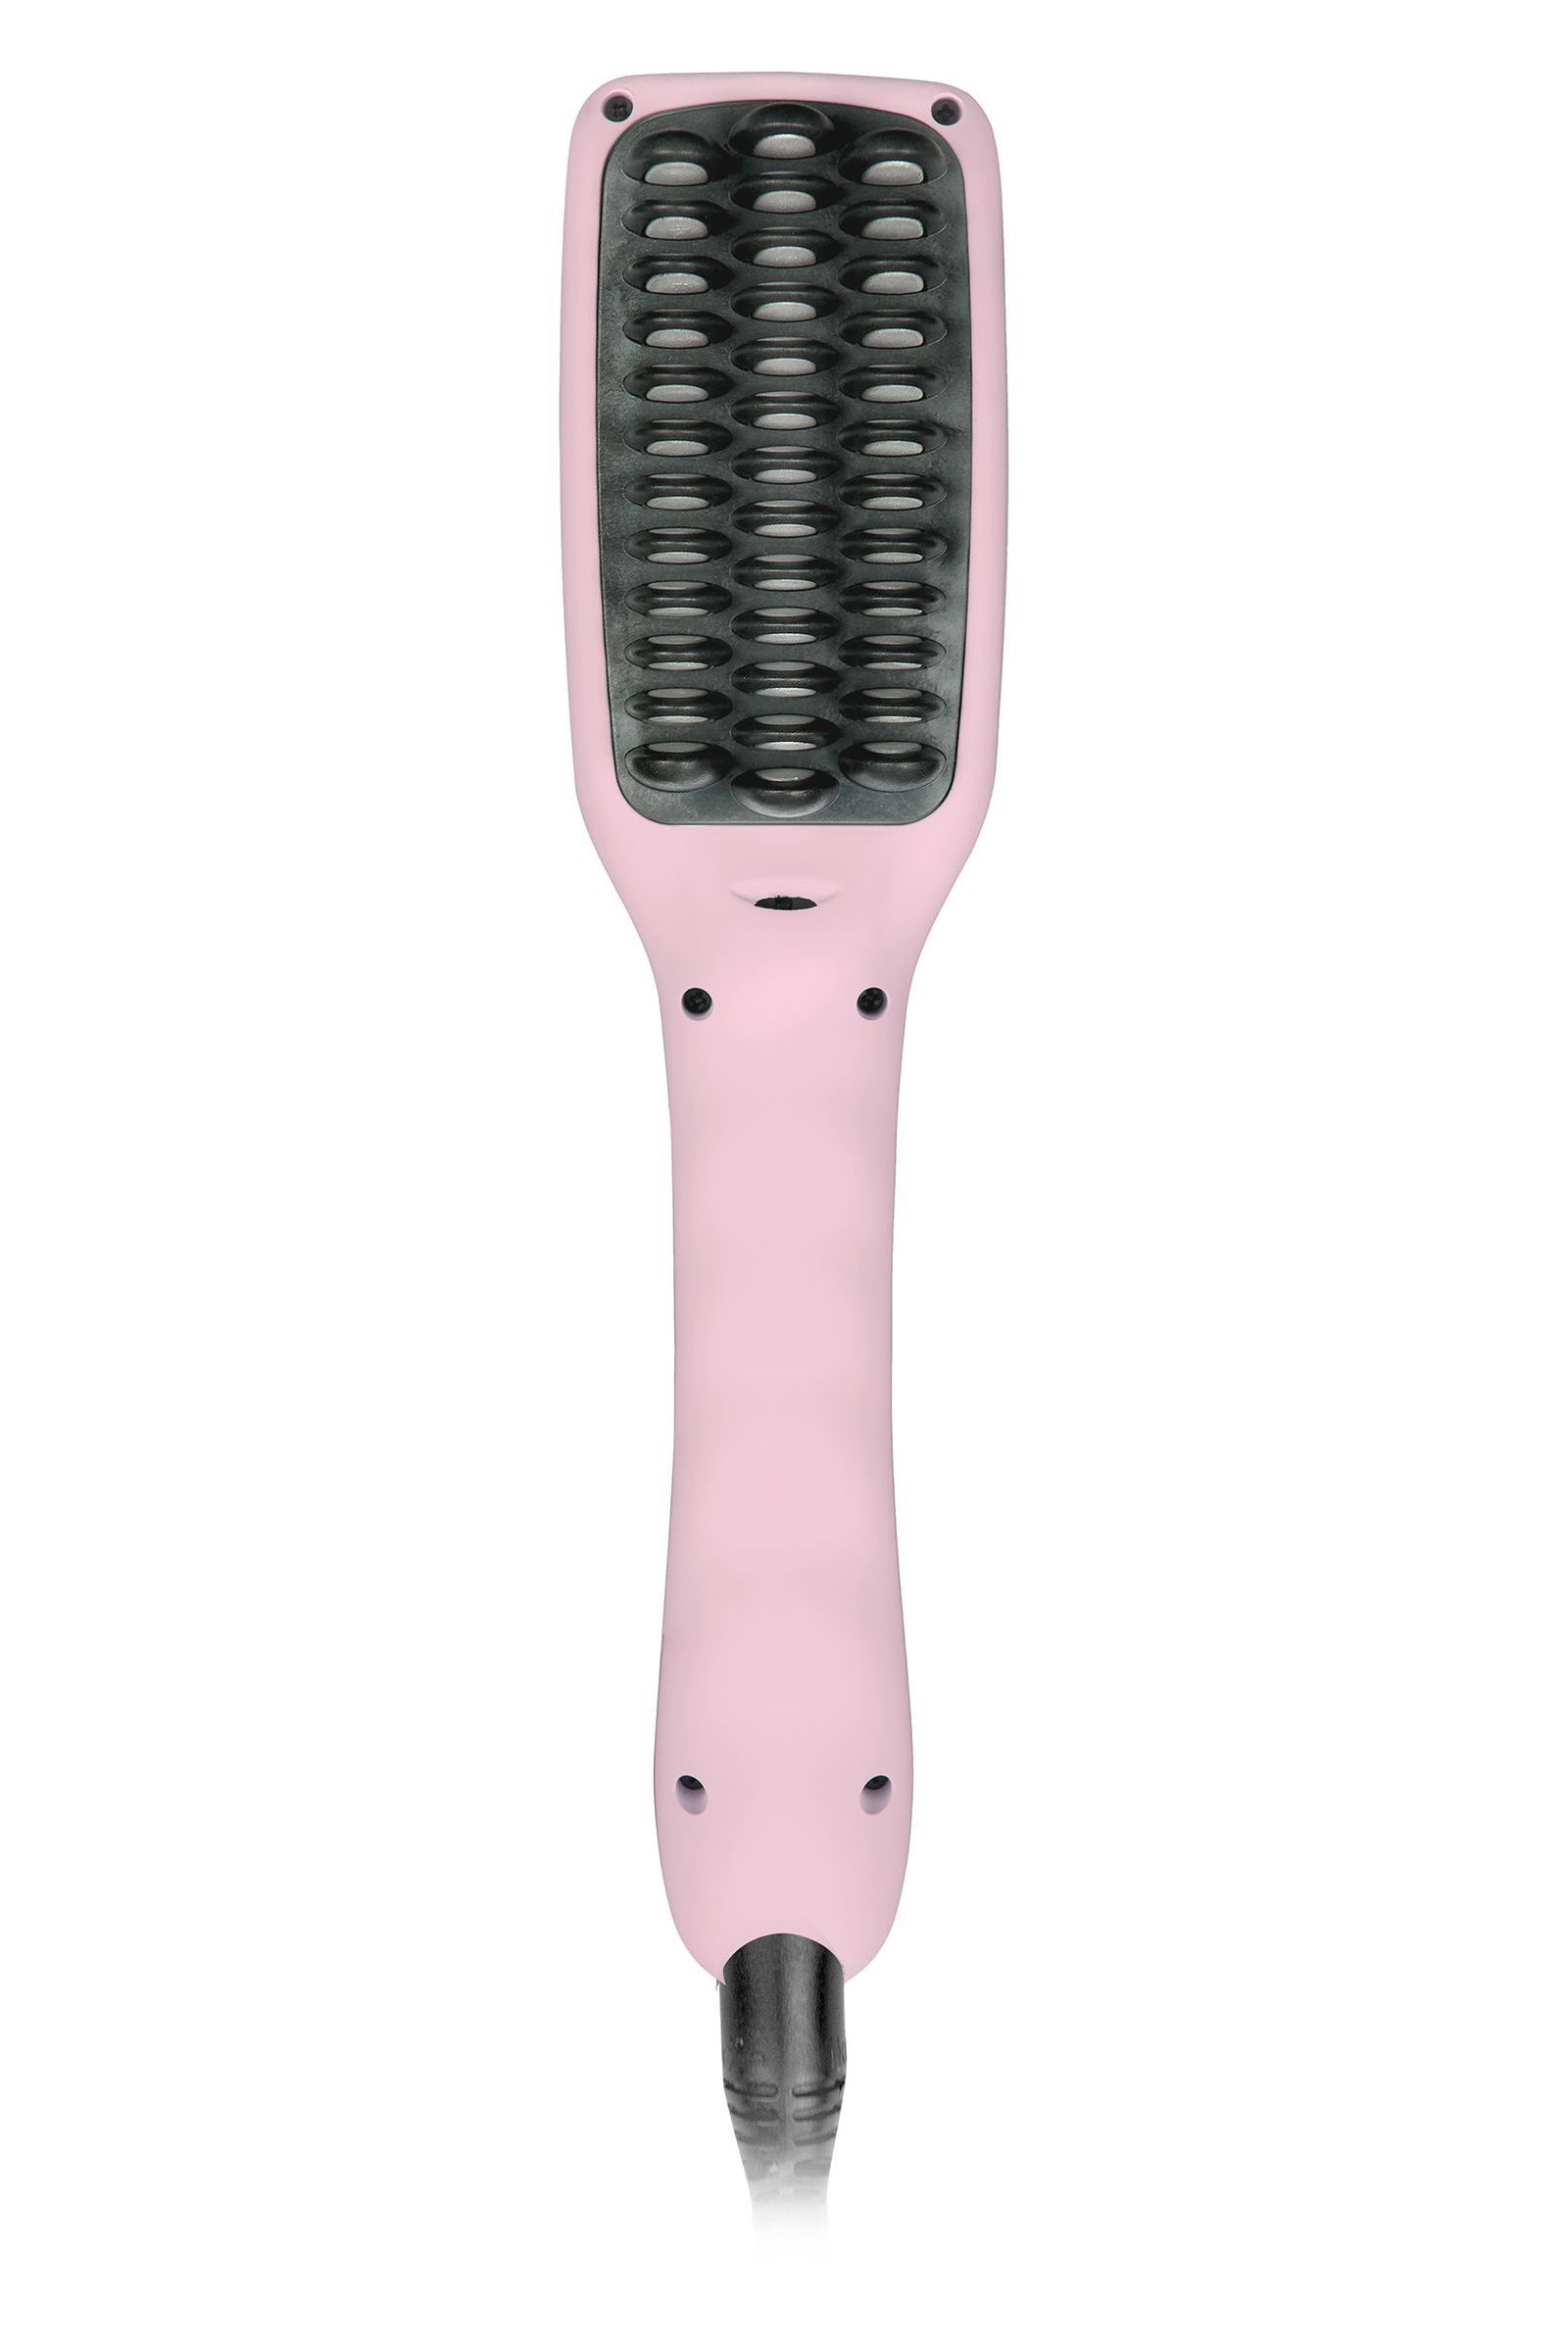    Ikoo e-styler - cotton candy, 292133, 